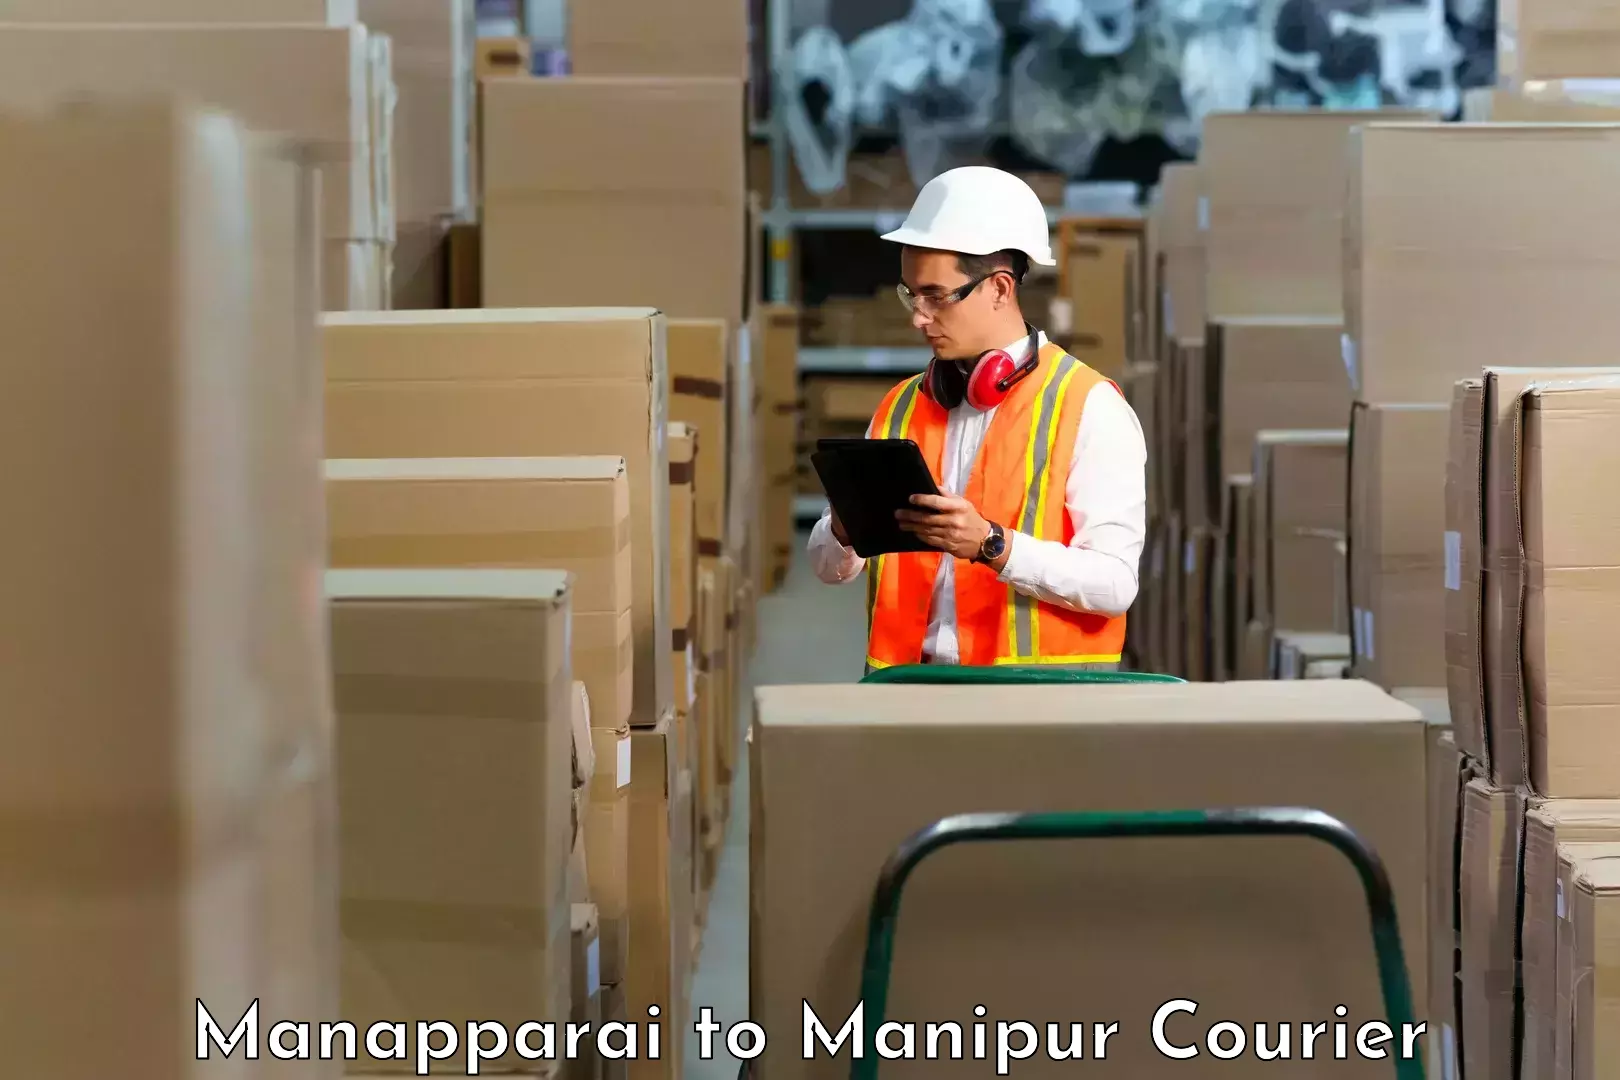 Efficient courier operations Manapparai to Thoubal